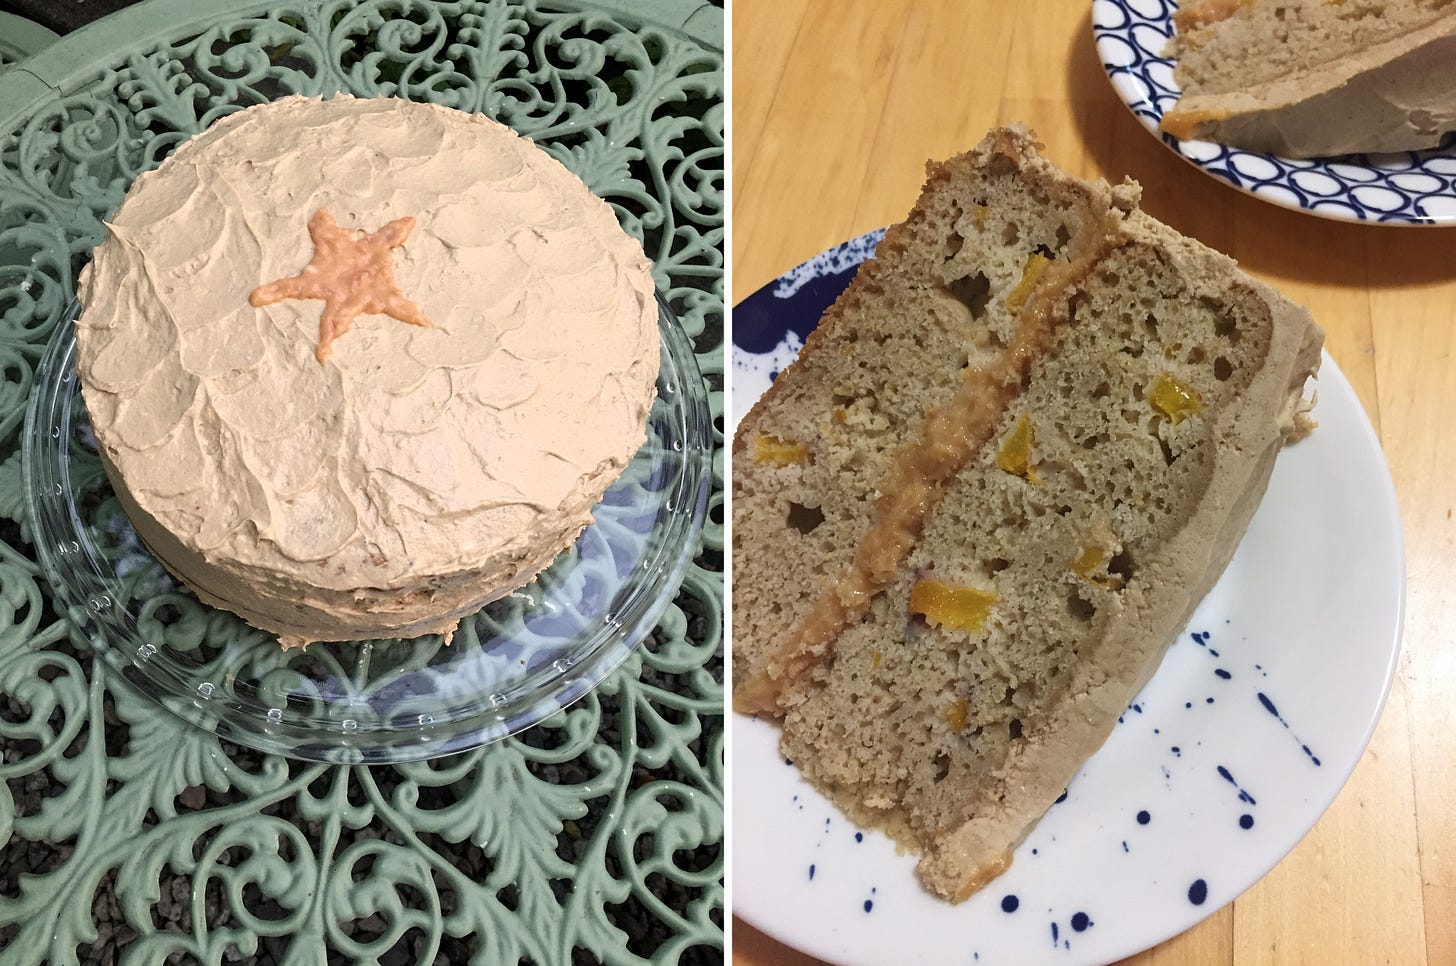 left image: a round cake with brown sugar icing spread in waves sits on a green wrought-iron table. A sloppy star made of pink peach curd is drawn on top. Right image: a slice of the cake on its side on a white plate. Pieces of peach are visible throughout the cake layers, and between the layers is some of the peach curd.